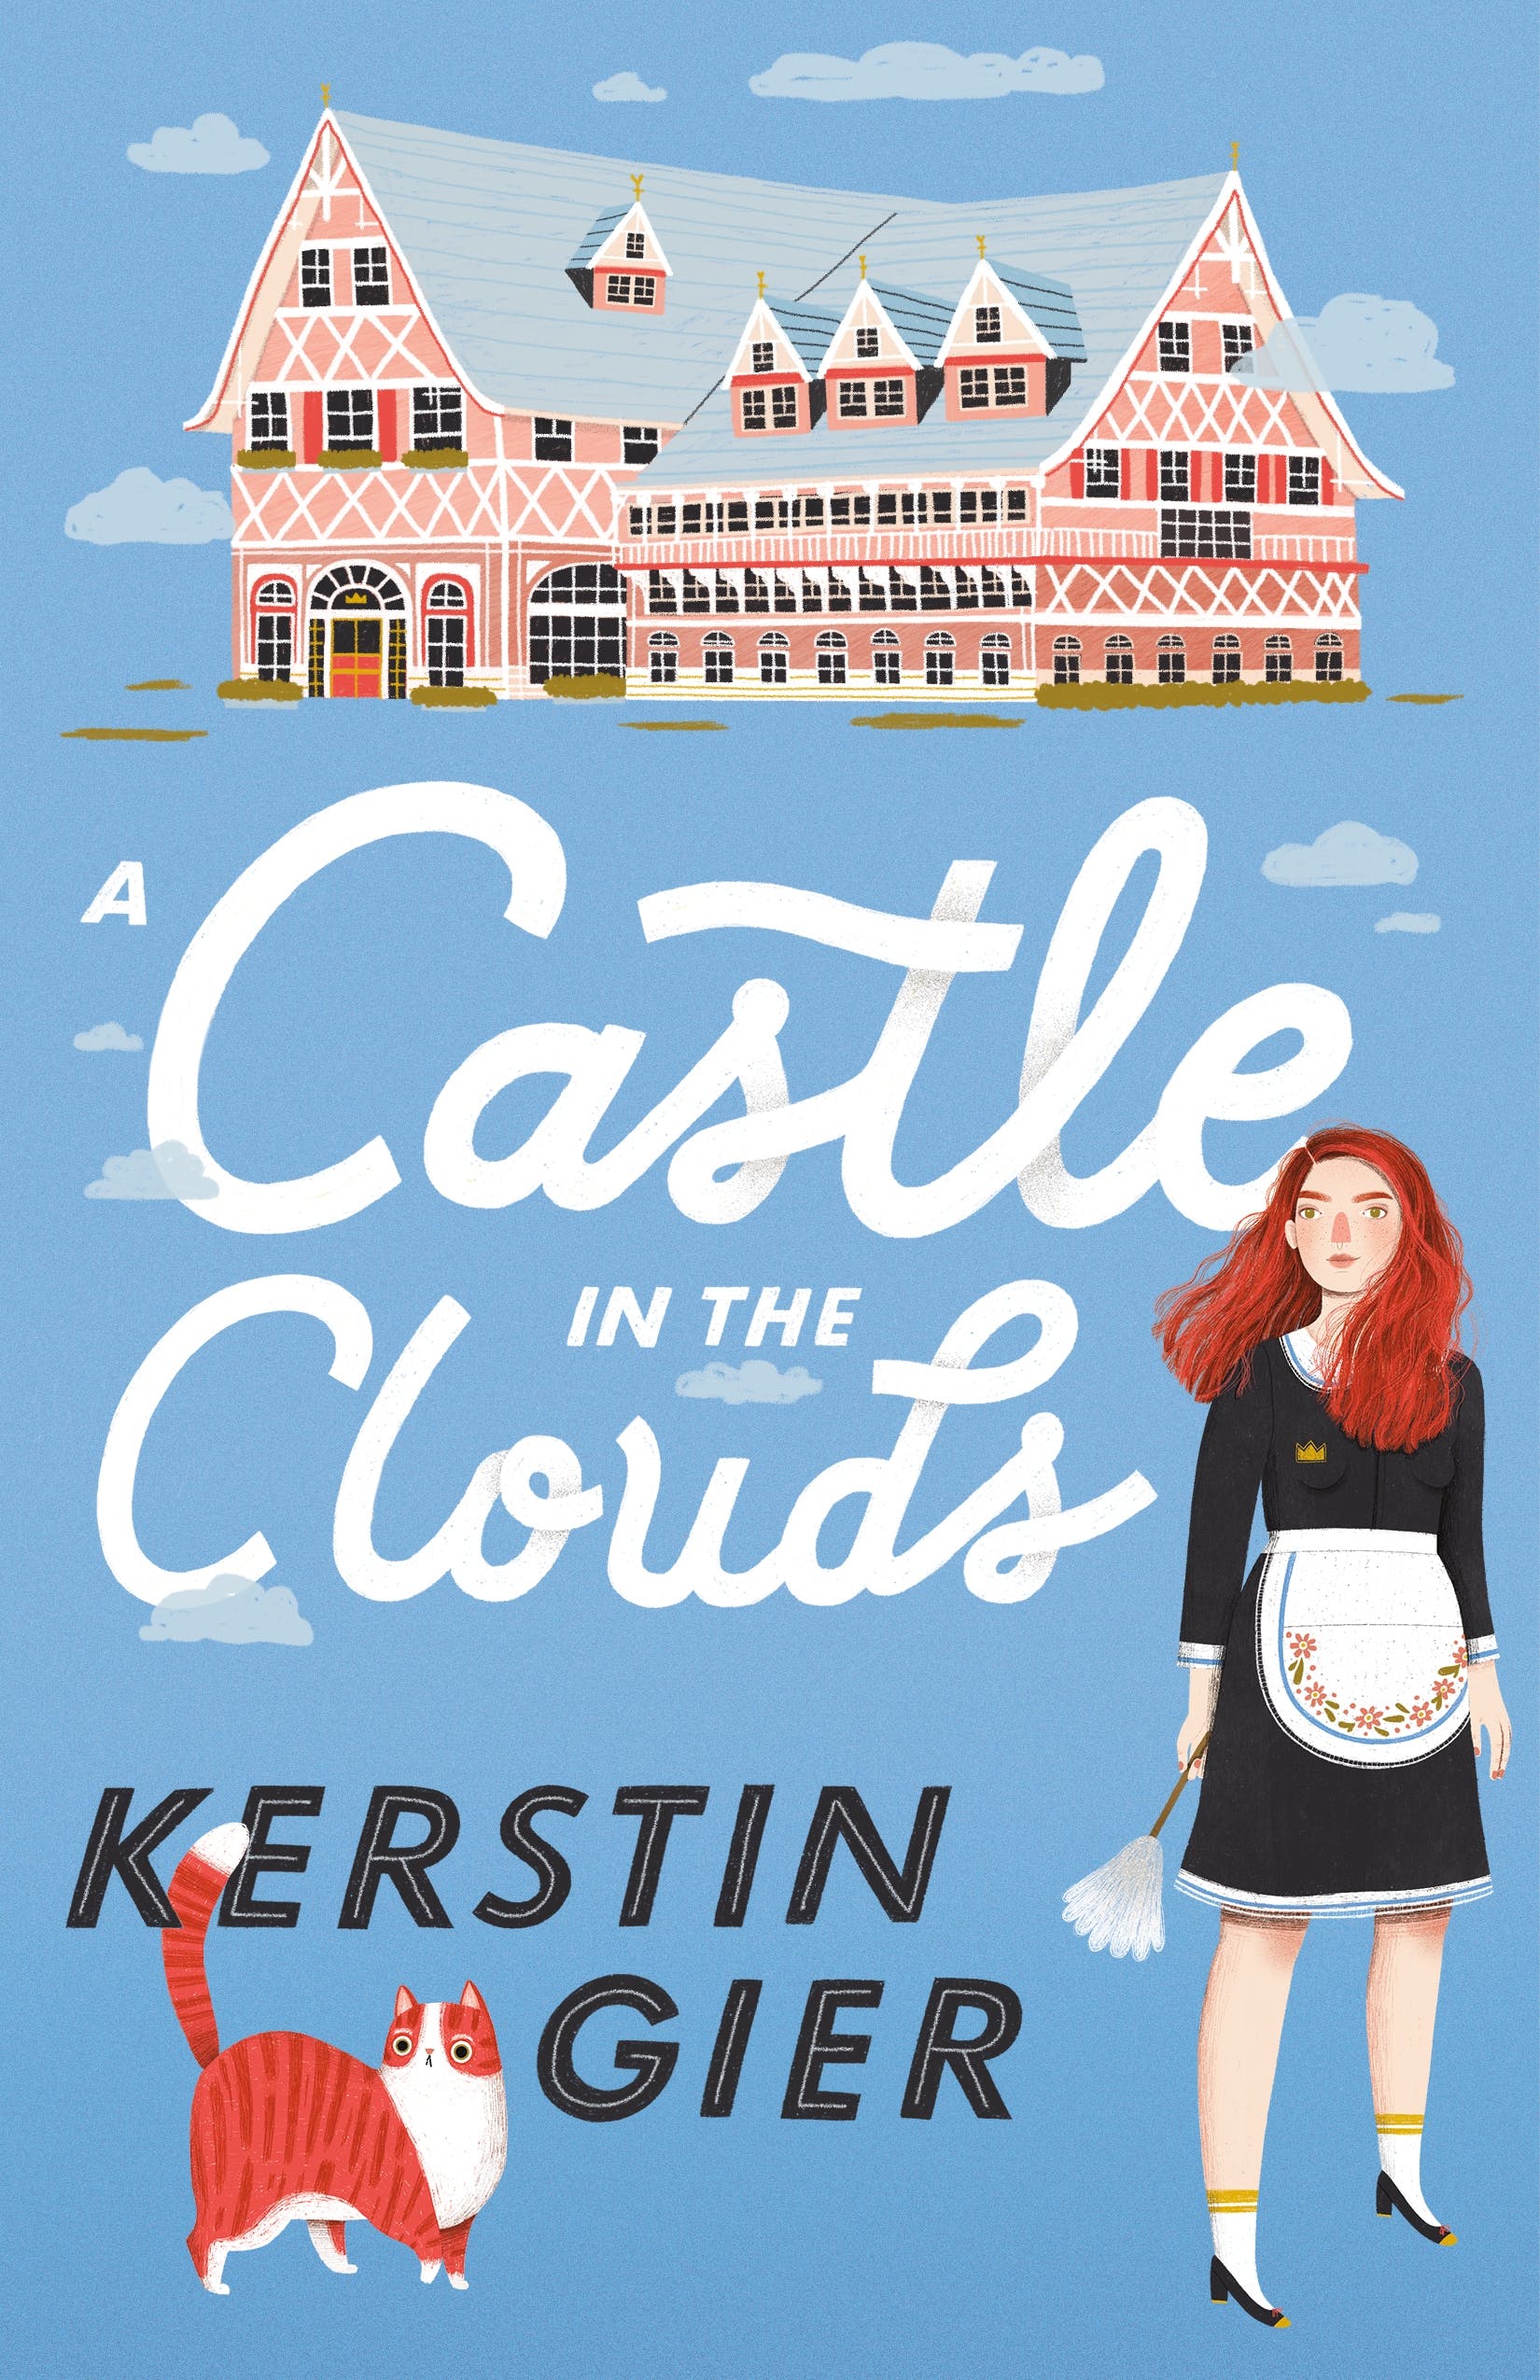 A Castle in the Clouds by Kerstin Gier